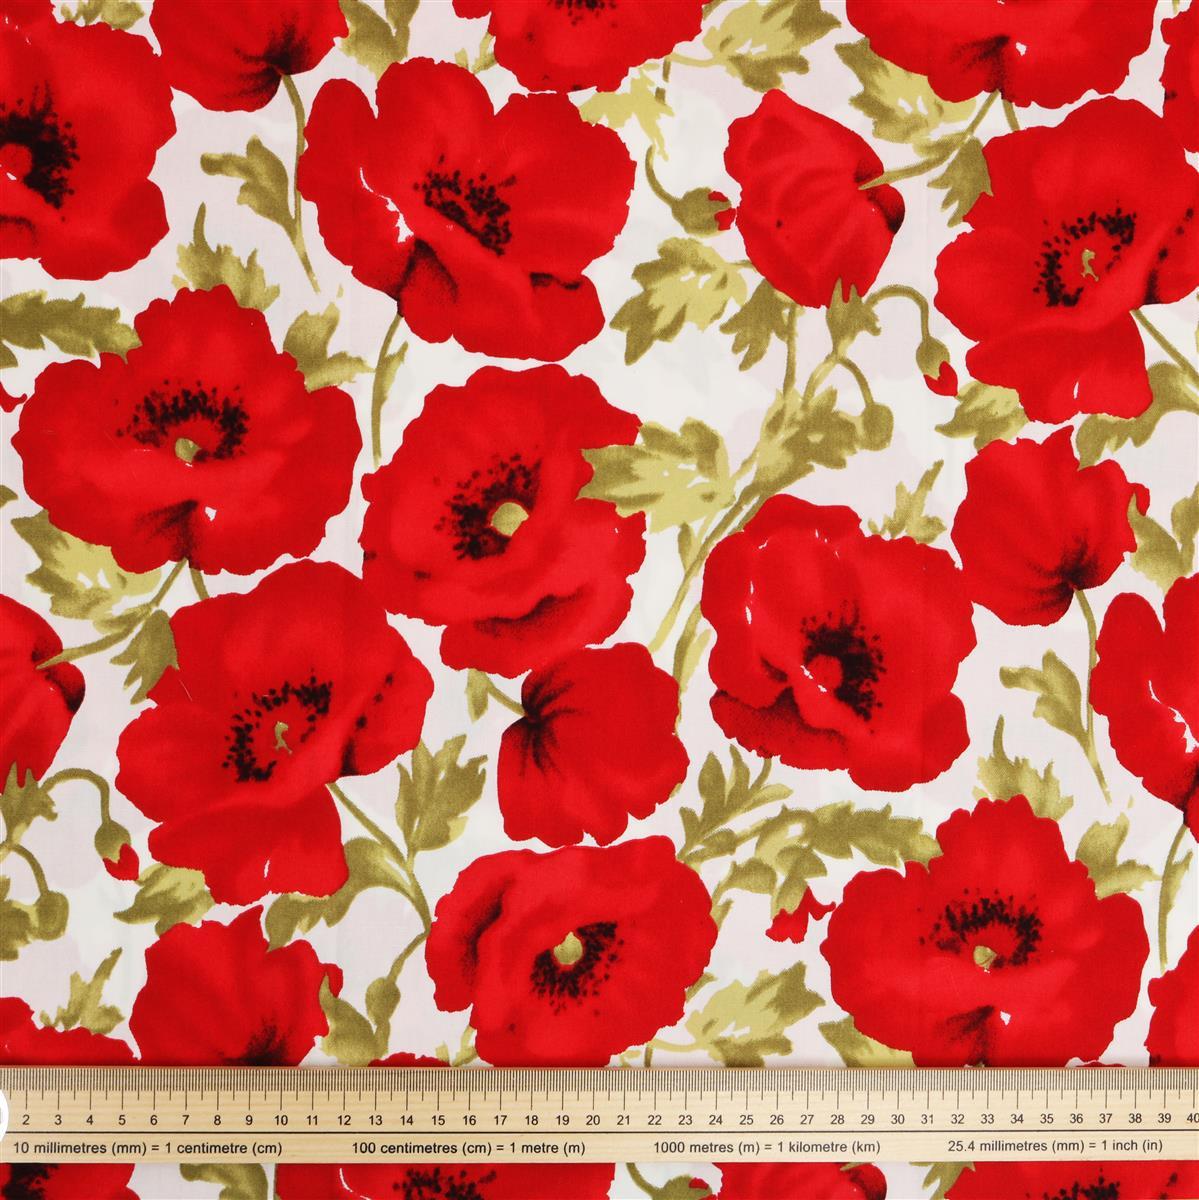 White Background with Red M Logo - Large Red Poppy Print on White Background Fabric. 0.5m - Sewing Quarter